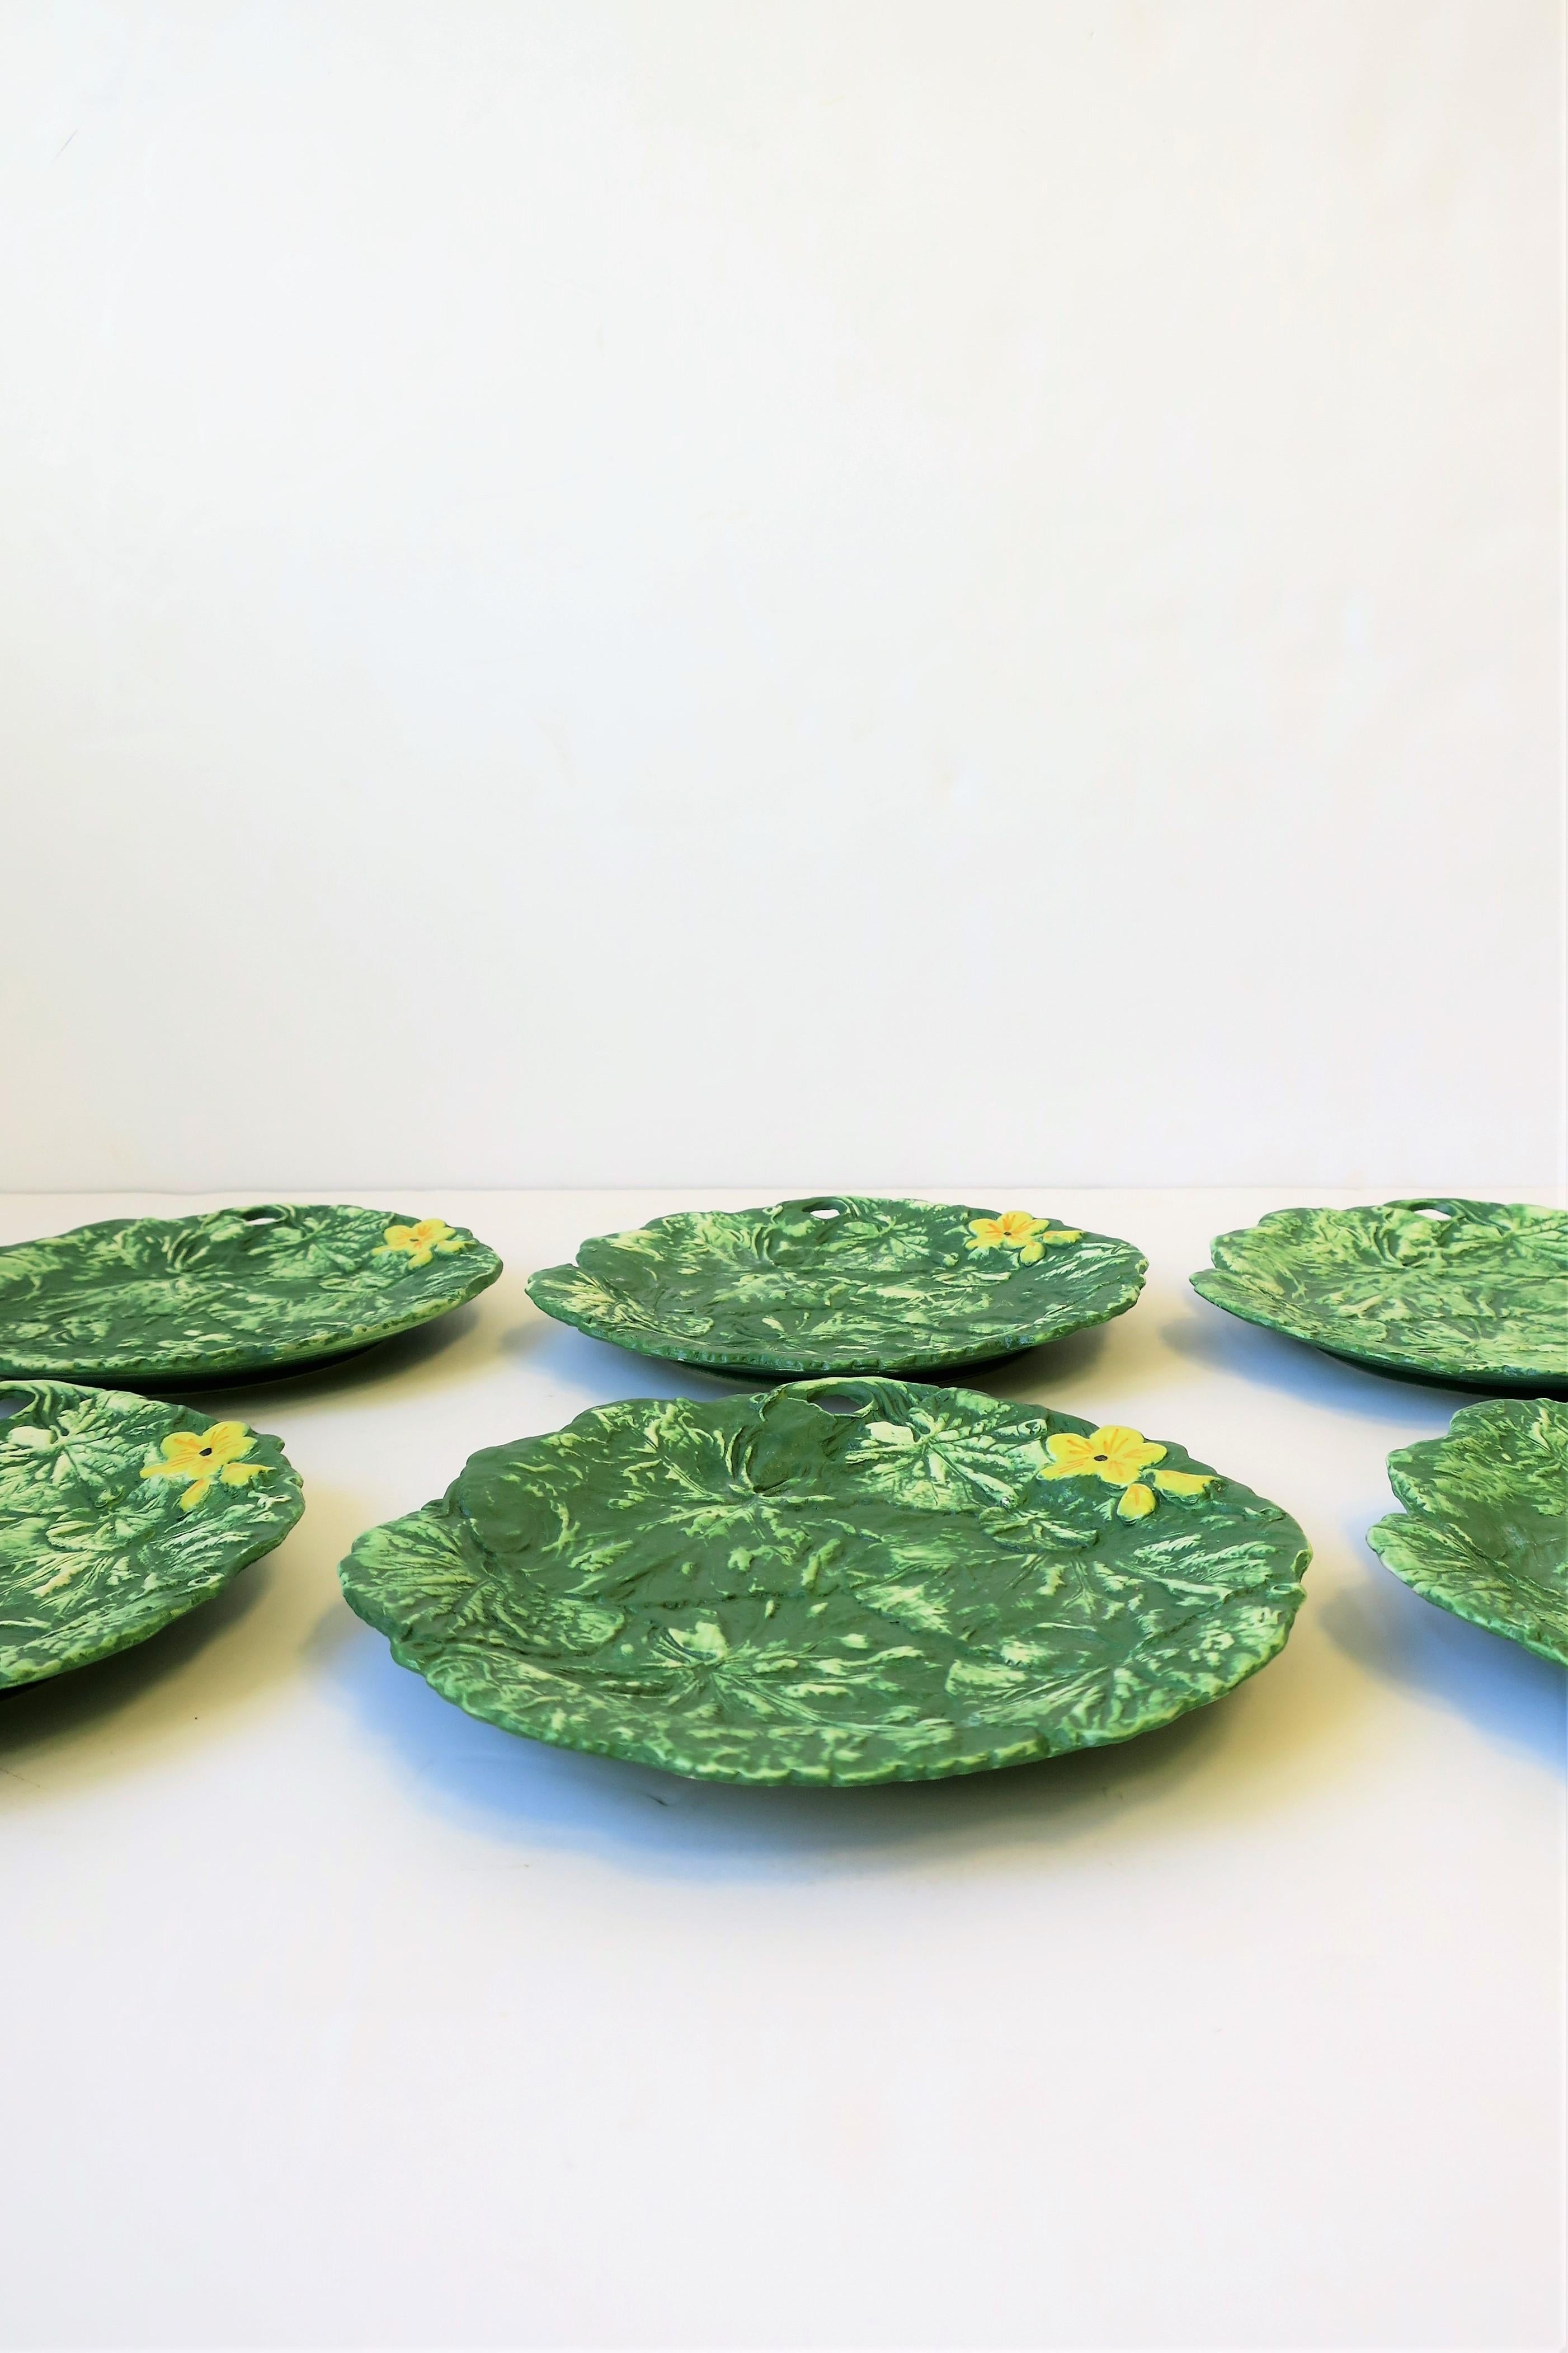 20th Century Italian Designer Green Leaf and Yellow Flower Plates, Set of 6 For Sale